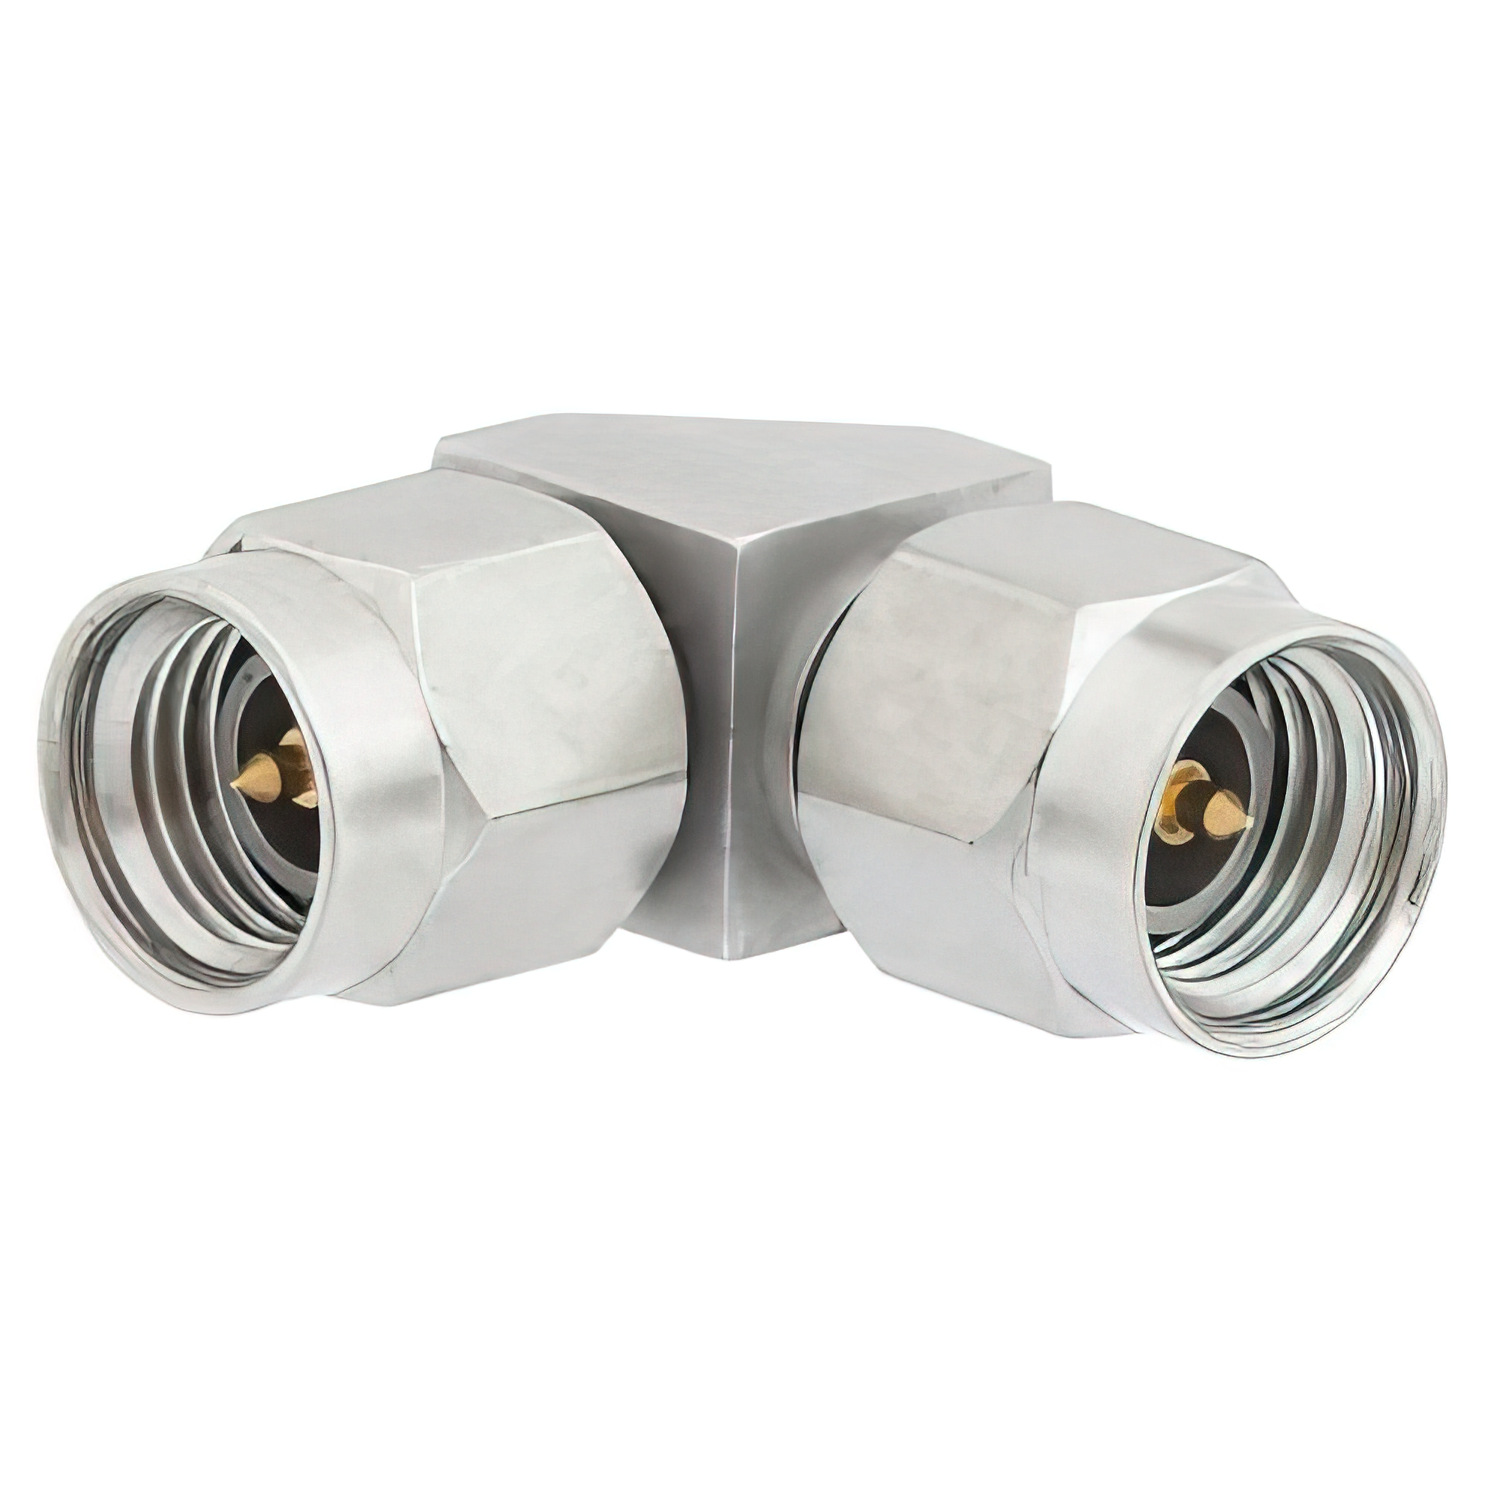 3.5mm Male to 3.5mm Male Right Angle Adapter1